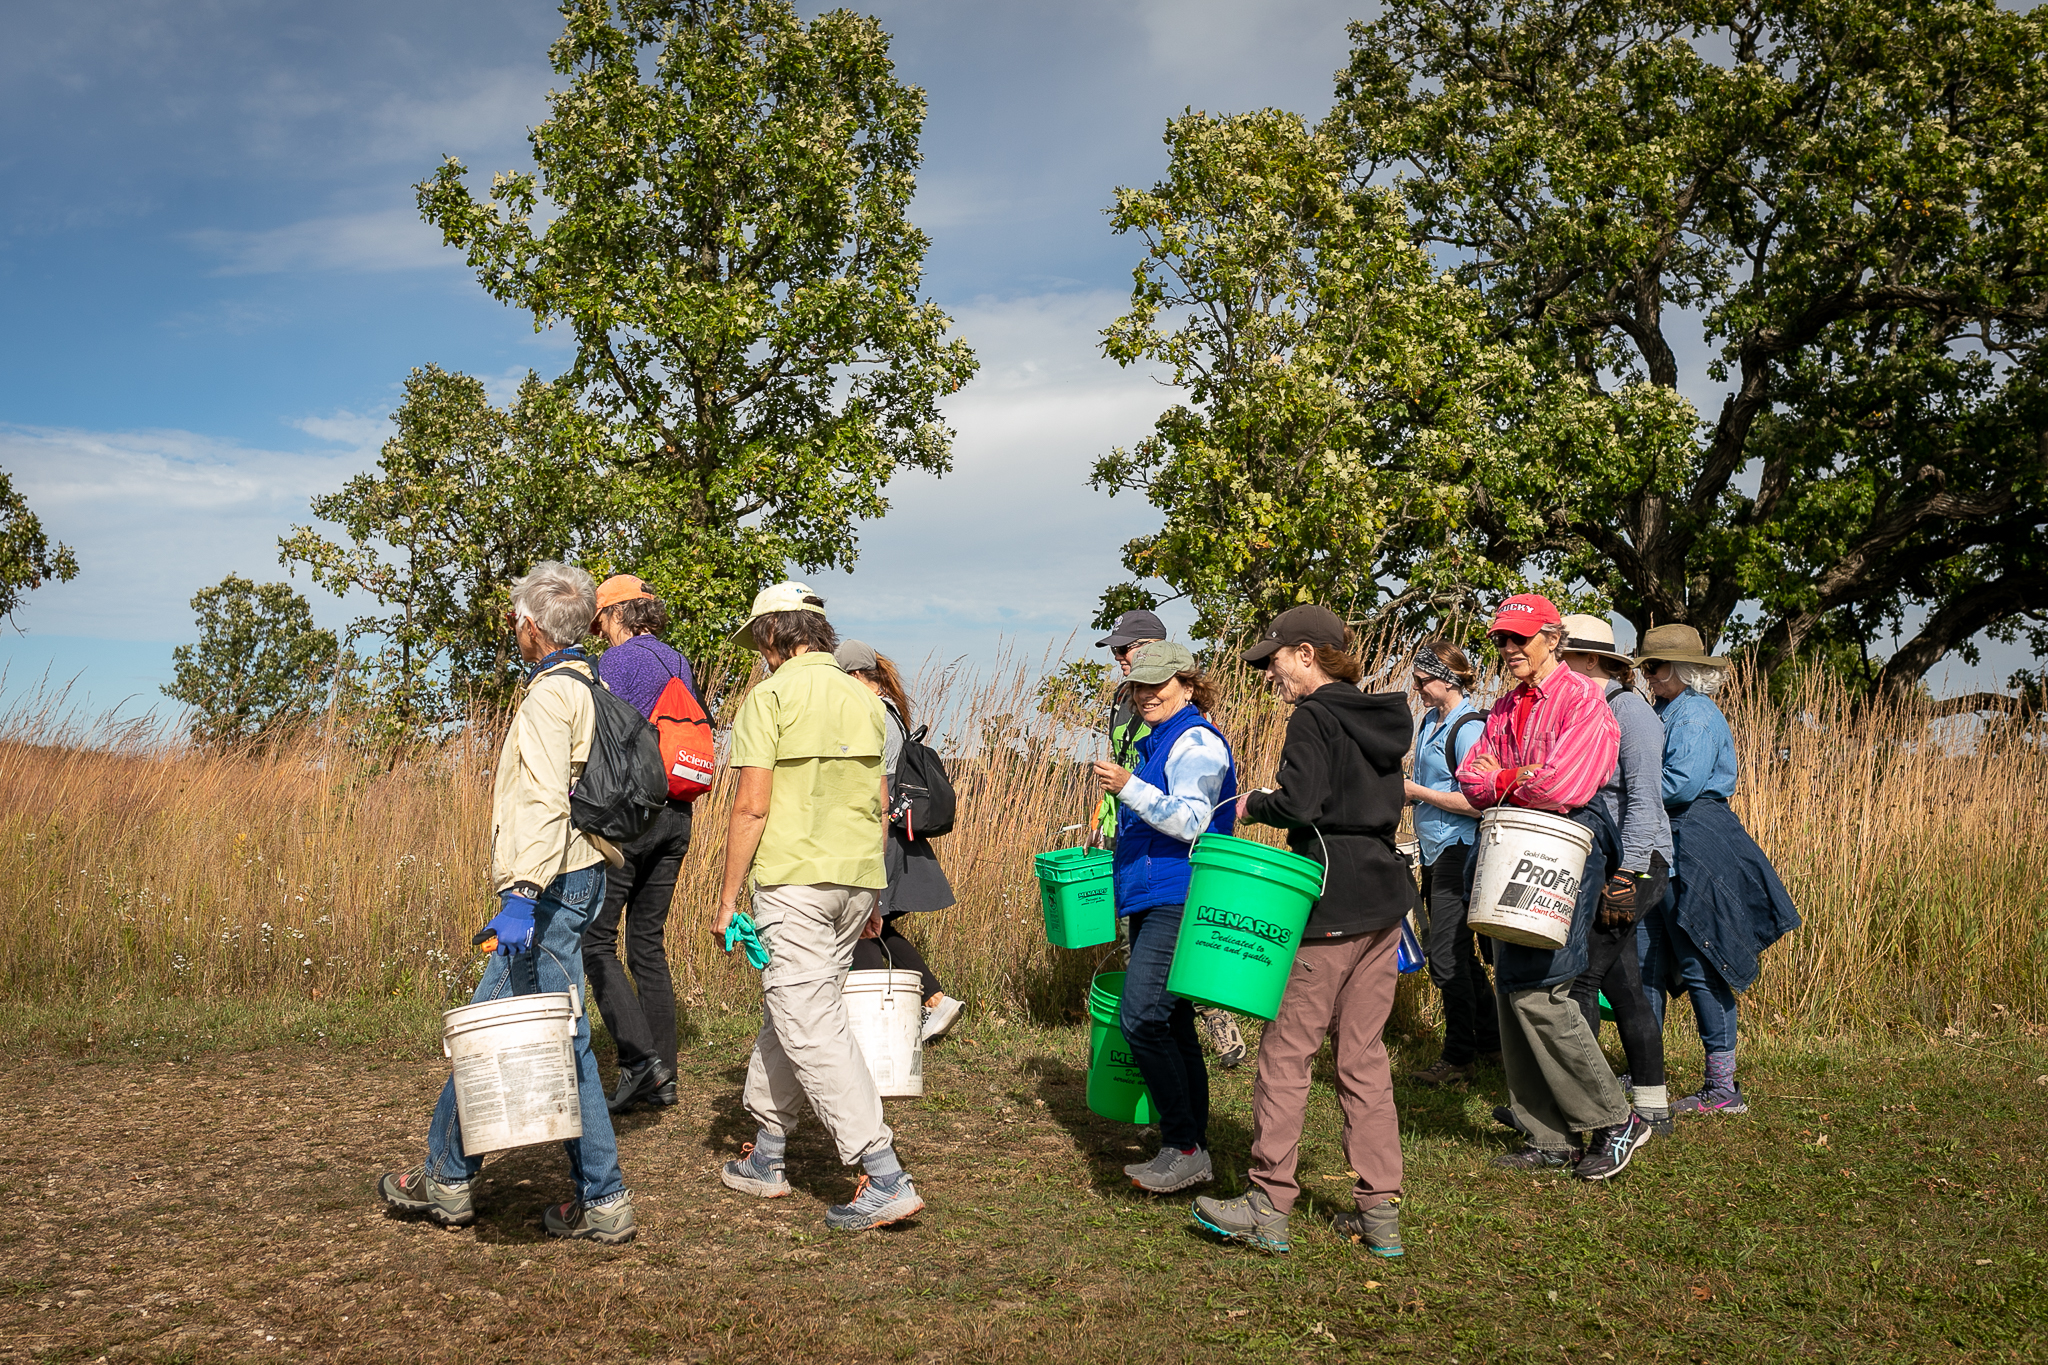 Volunteers carrying buckets during NPLD activity on Ice Age Trail.